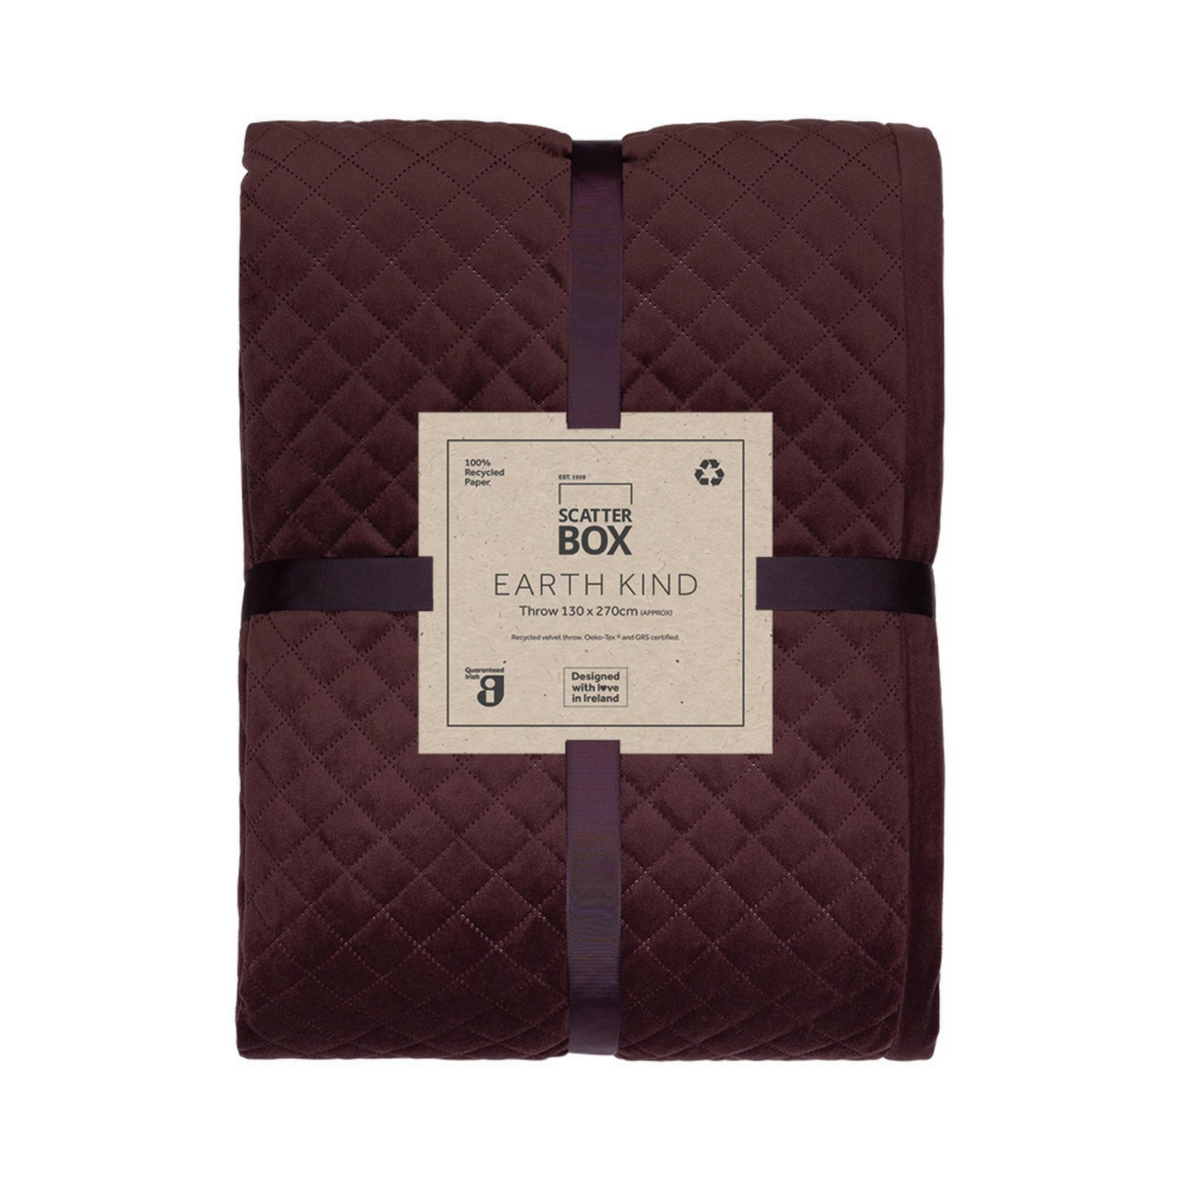 Scatterbox Erin Diamond throw in Aubergine, folded and packaged with black ribbon and a Scatterbox label